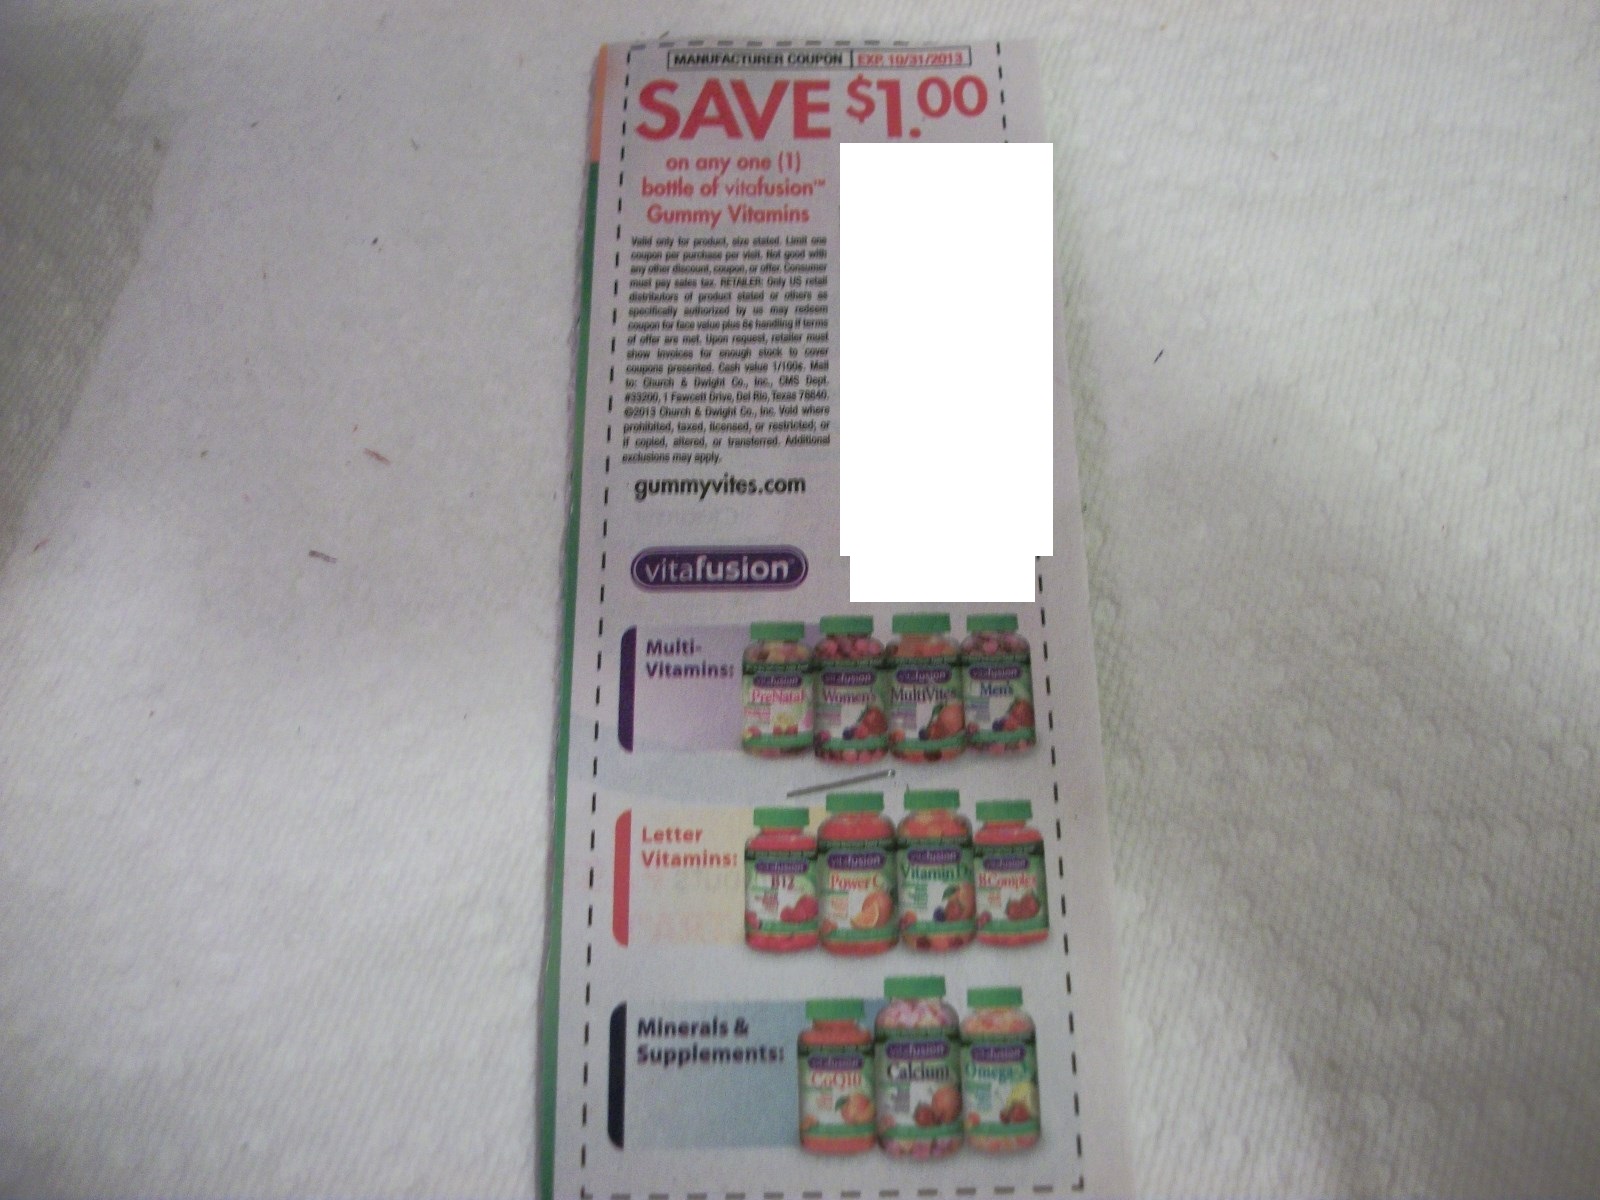 Save $1.00 on any one (1) bottle of vitafusion Gummy Vitamins Expires 10/31/2013